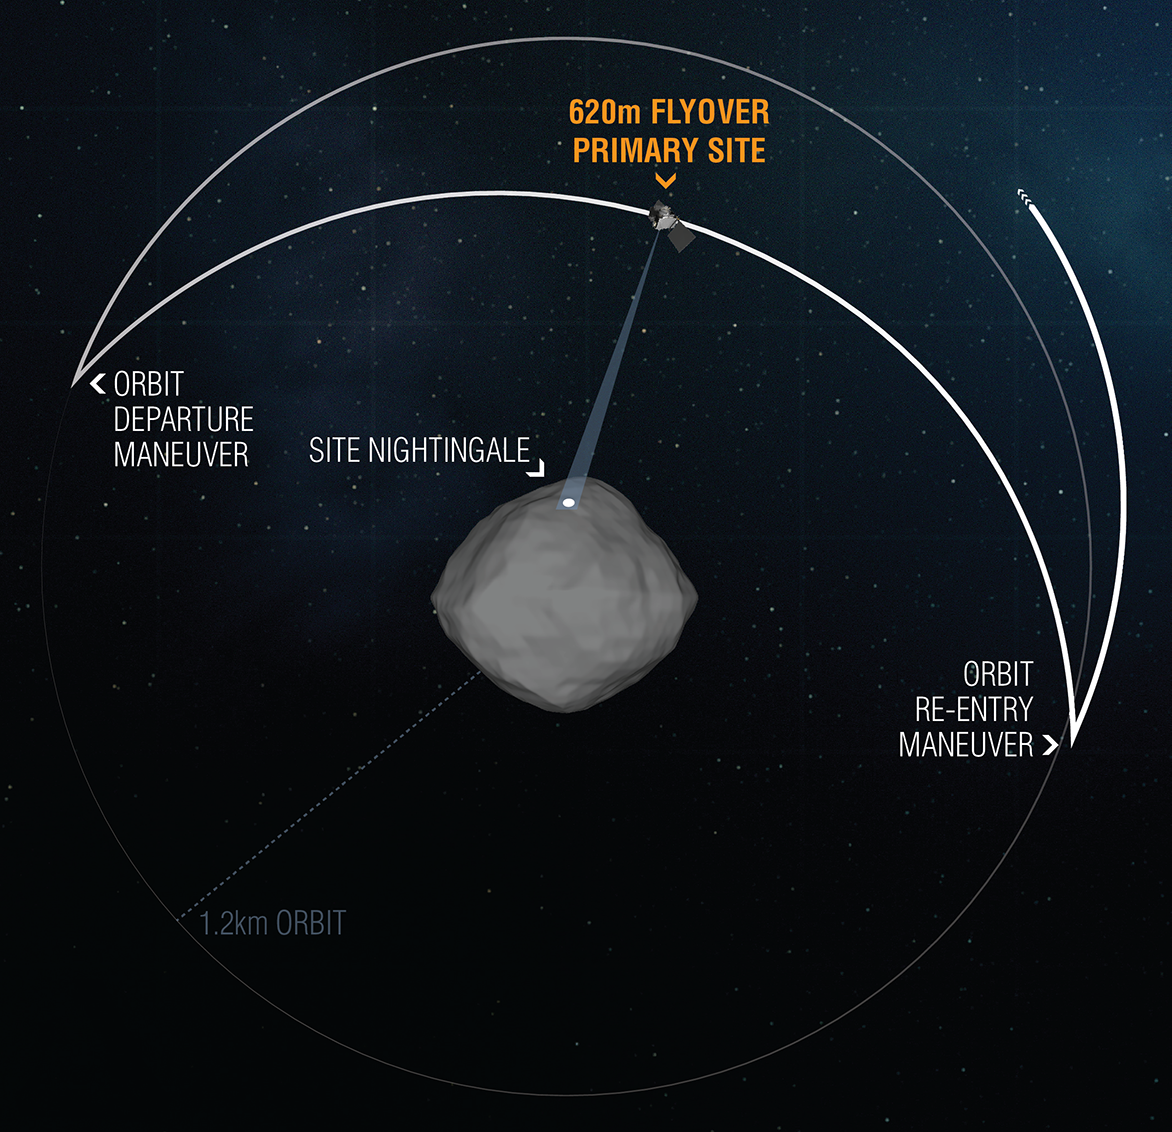 graphic showing asteroid, spacecraft and flight lines